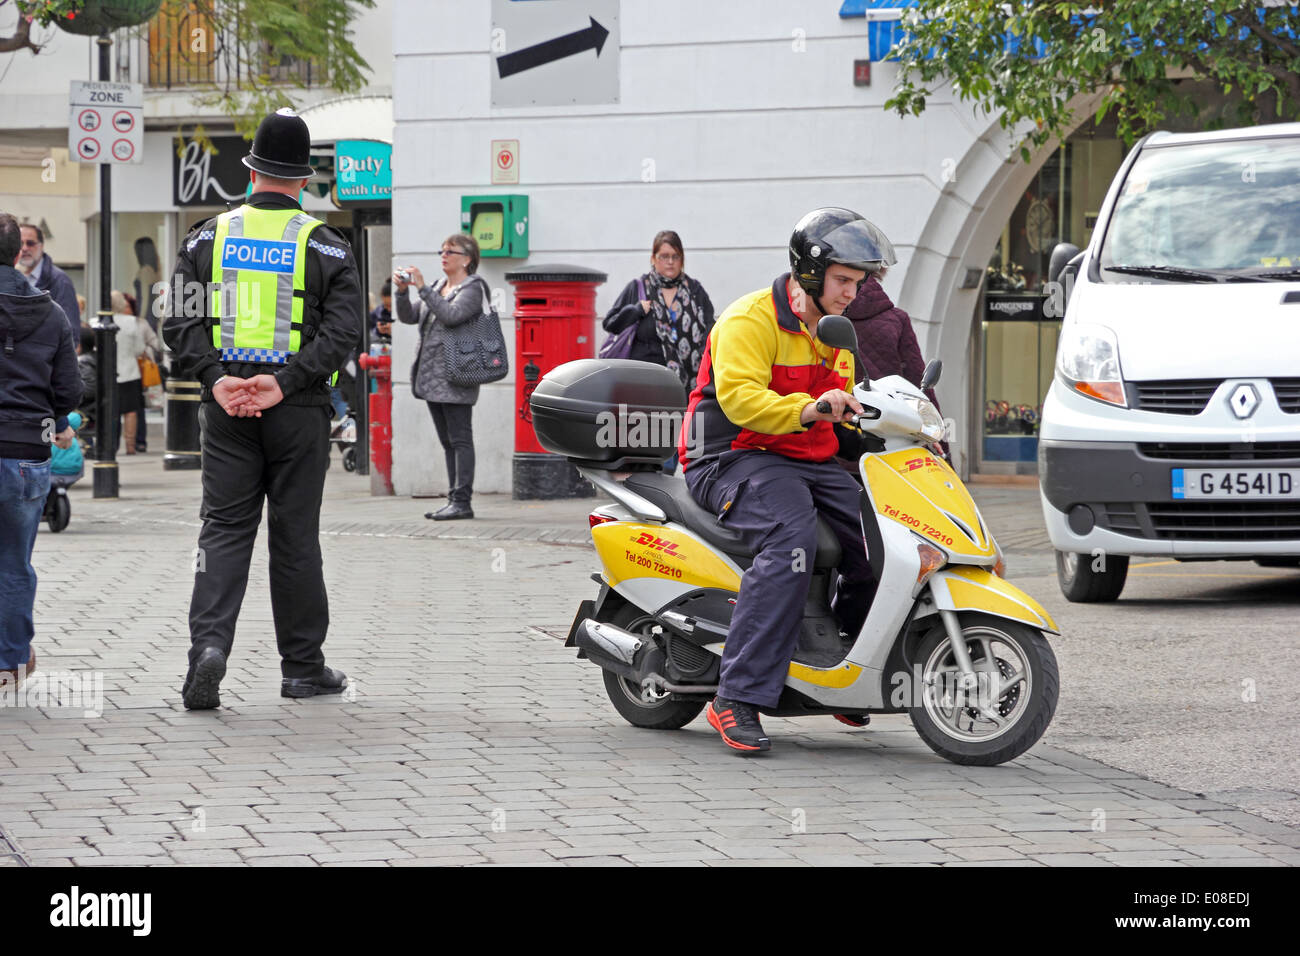 DHL courier on scooter with policeman in background Stock Photo